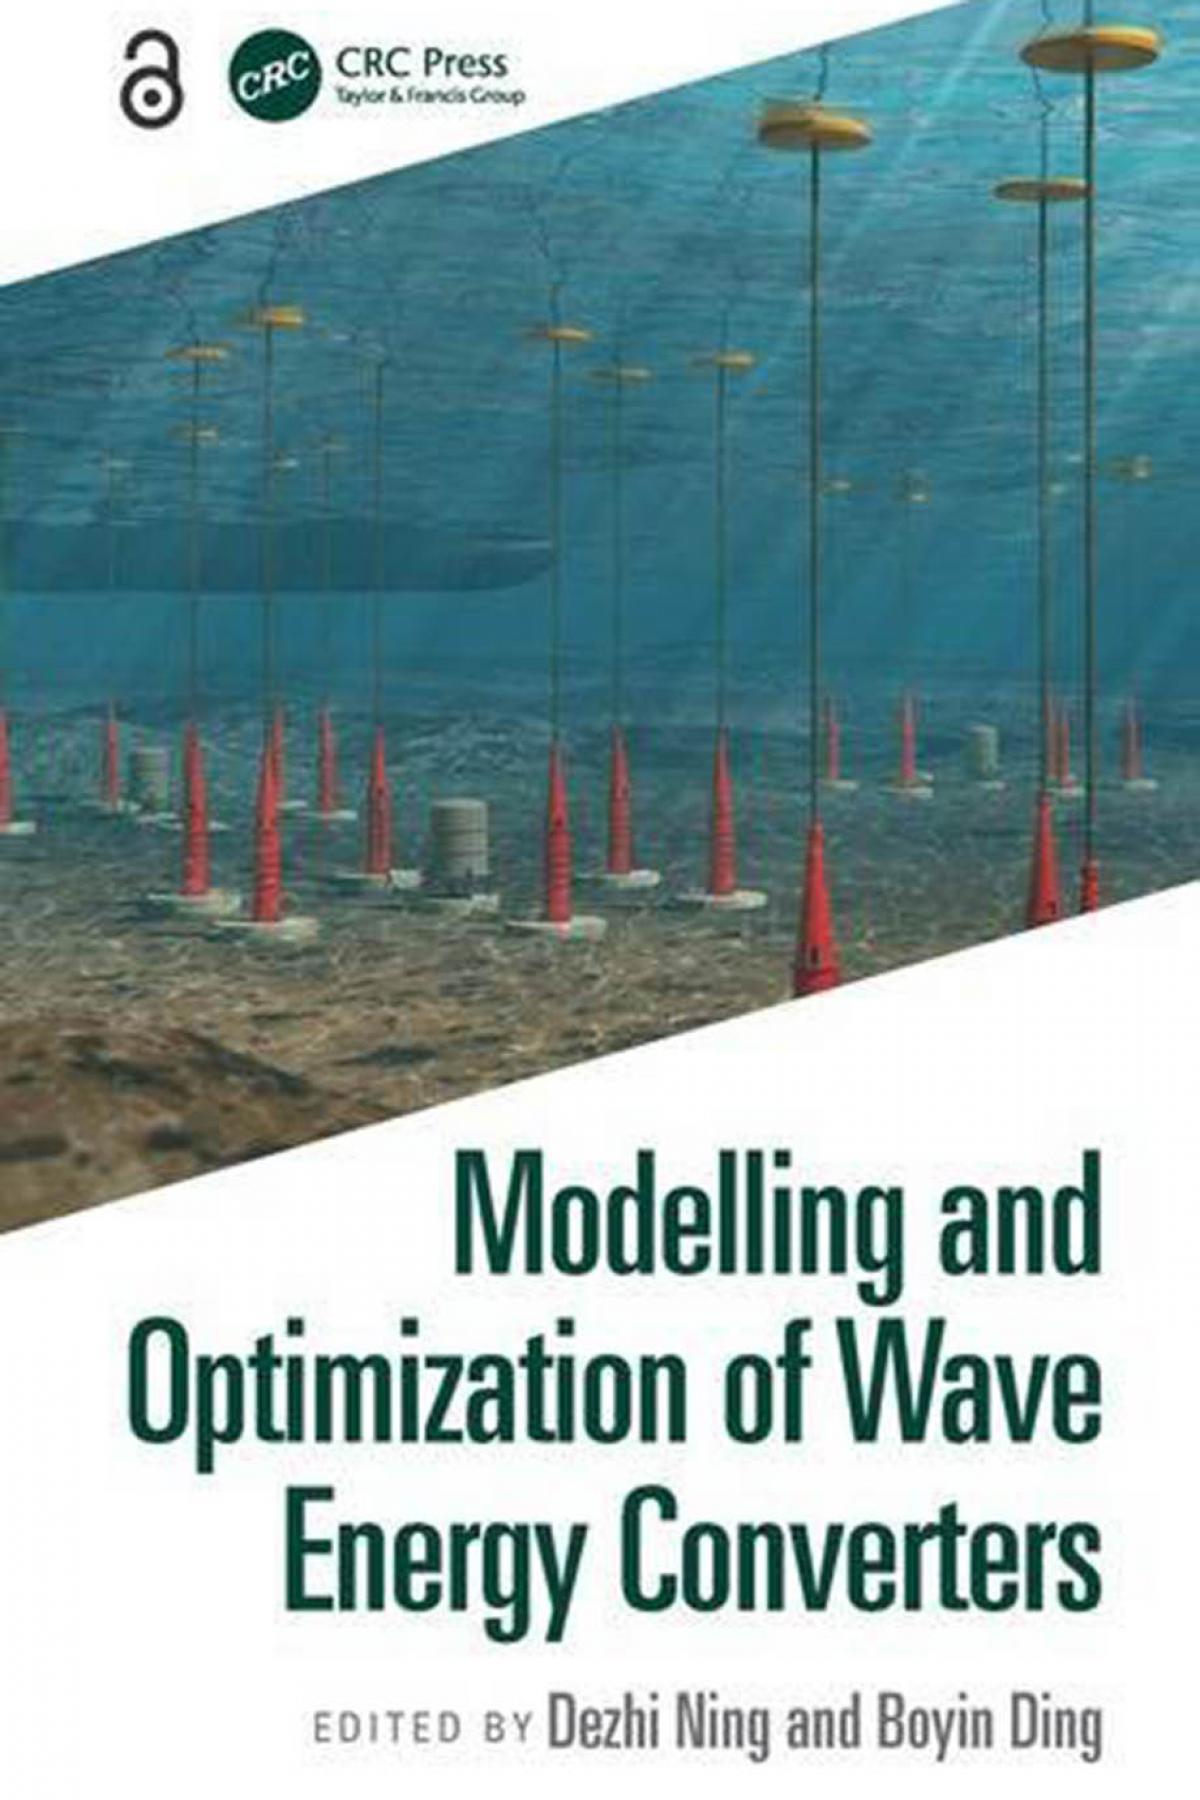 Front page of a book Modelling and Optimization of Wave Energy Converters